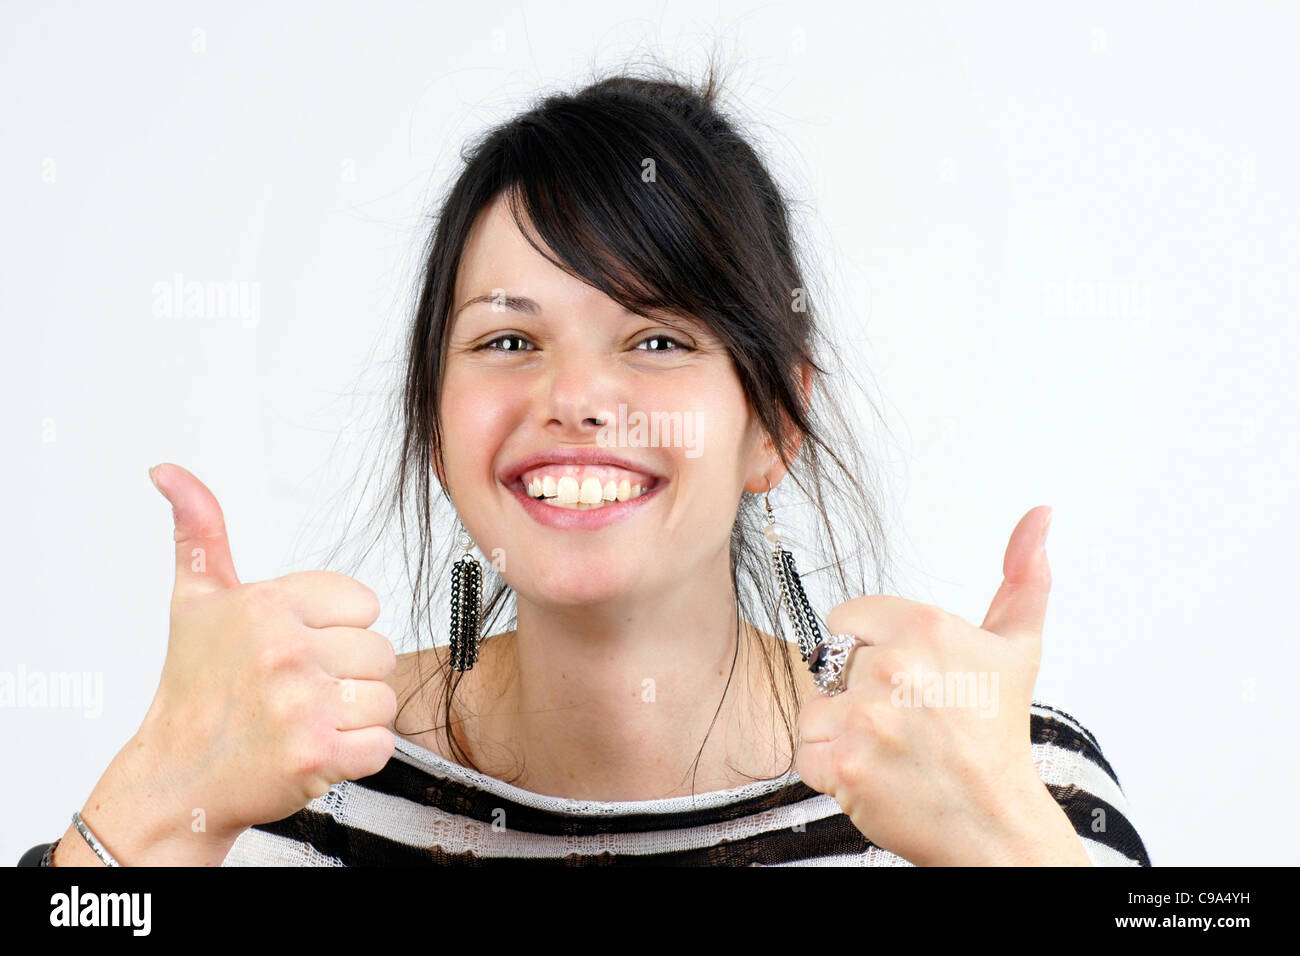 Funny candid shot of a young dark haired woman smiling and making the two thumbs up sign of approval, studio shot over white. Stock Photo